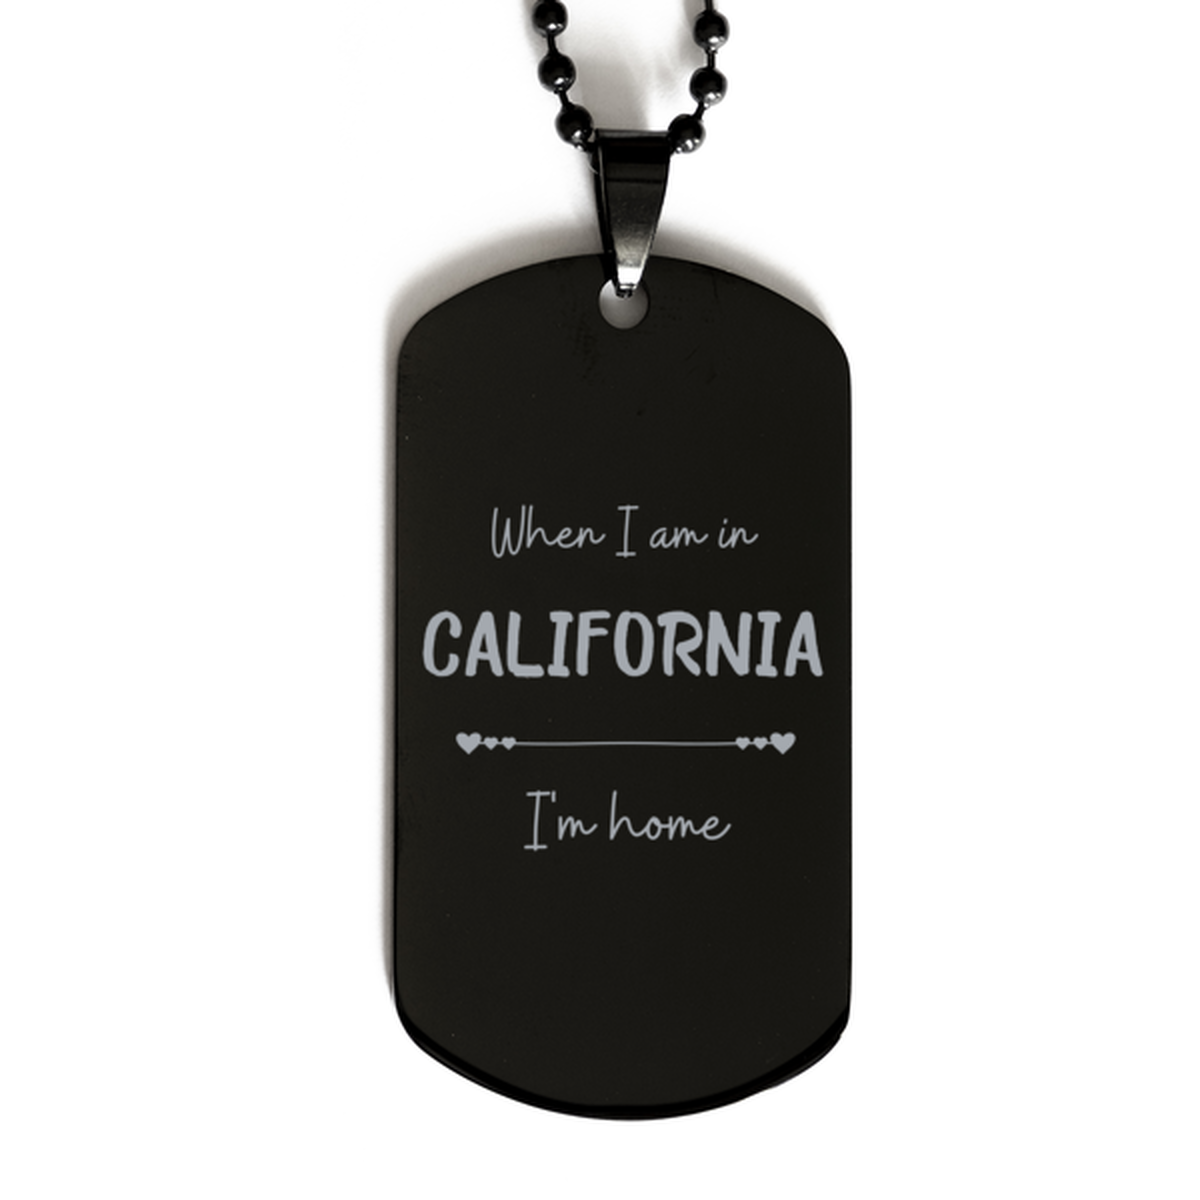 When I am in California I'm home Black Dog Tag, Cheap Gifts For California, State California Birthday Gifts for Friends Coworker